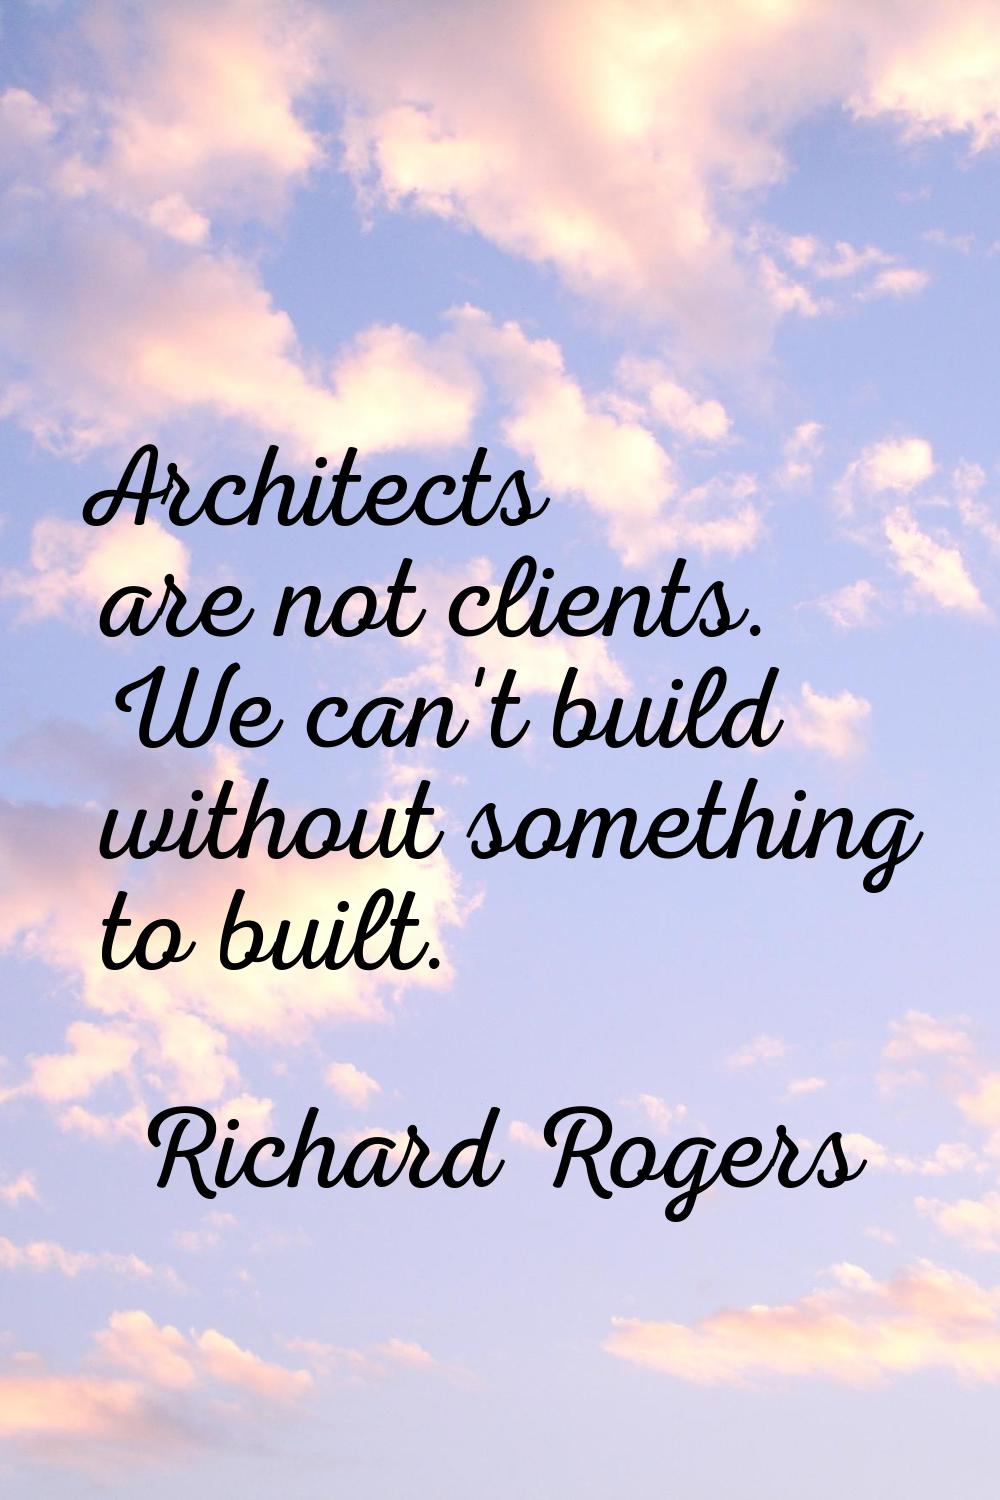 Architects are not clients. We can't build without something to built.